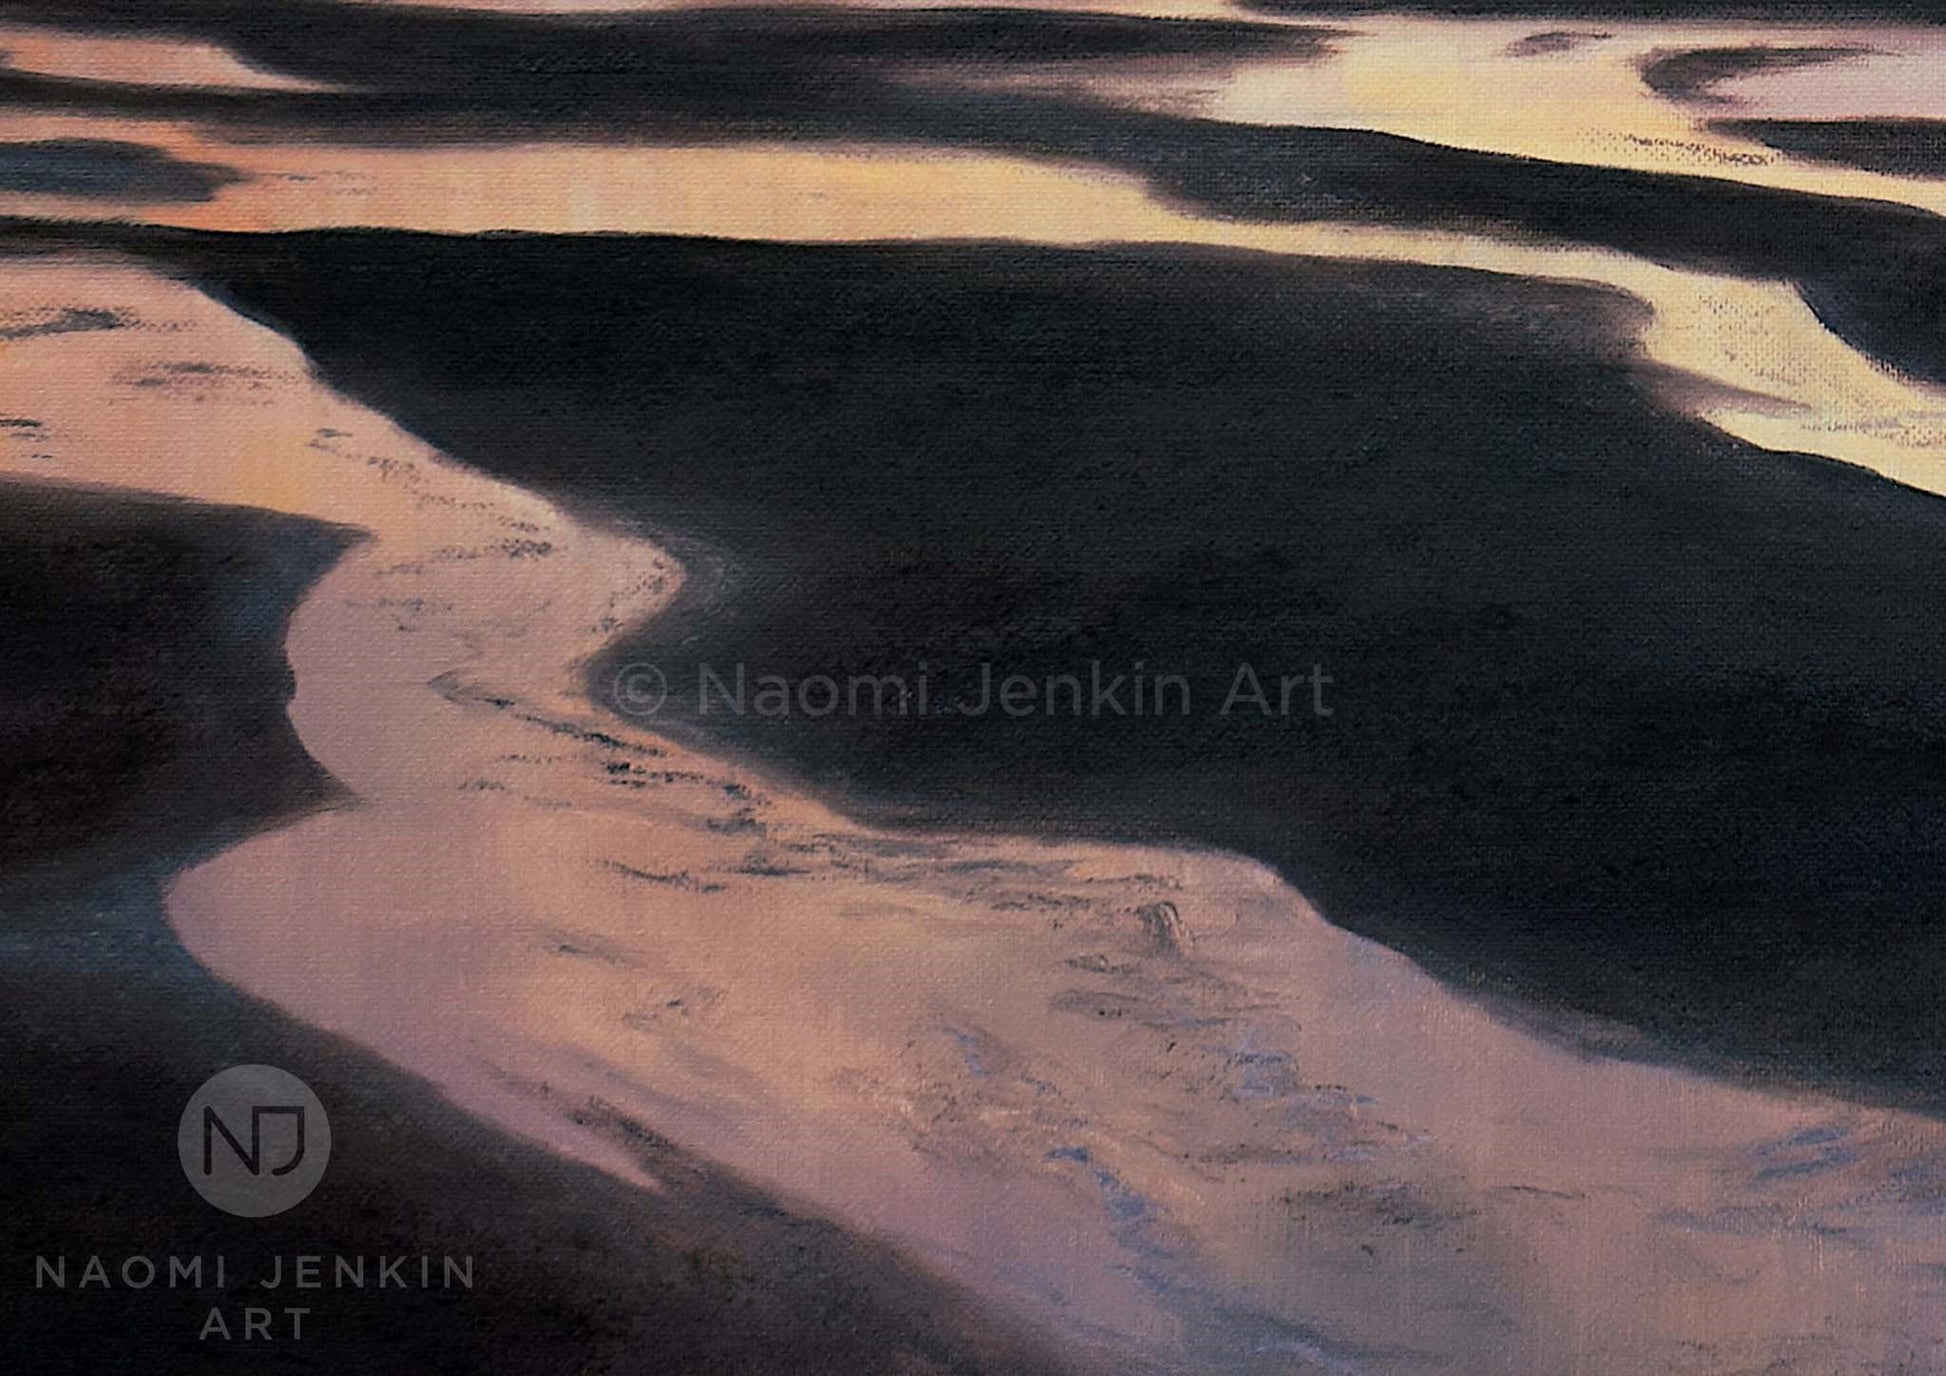 Close up of water reflections from the 'New Day Dawns' seascape painting by Naomi Jenkin Art